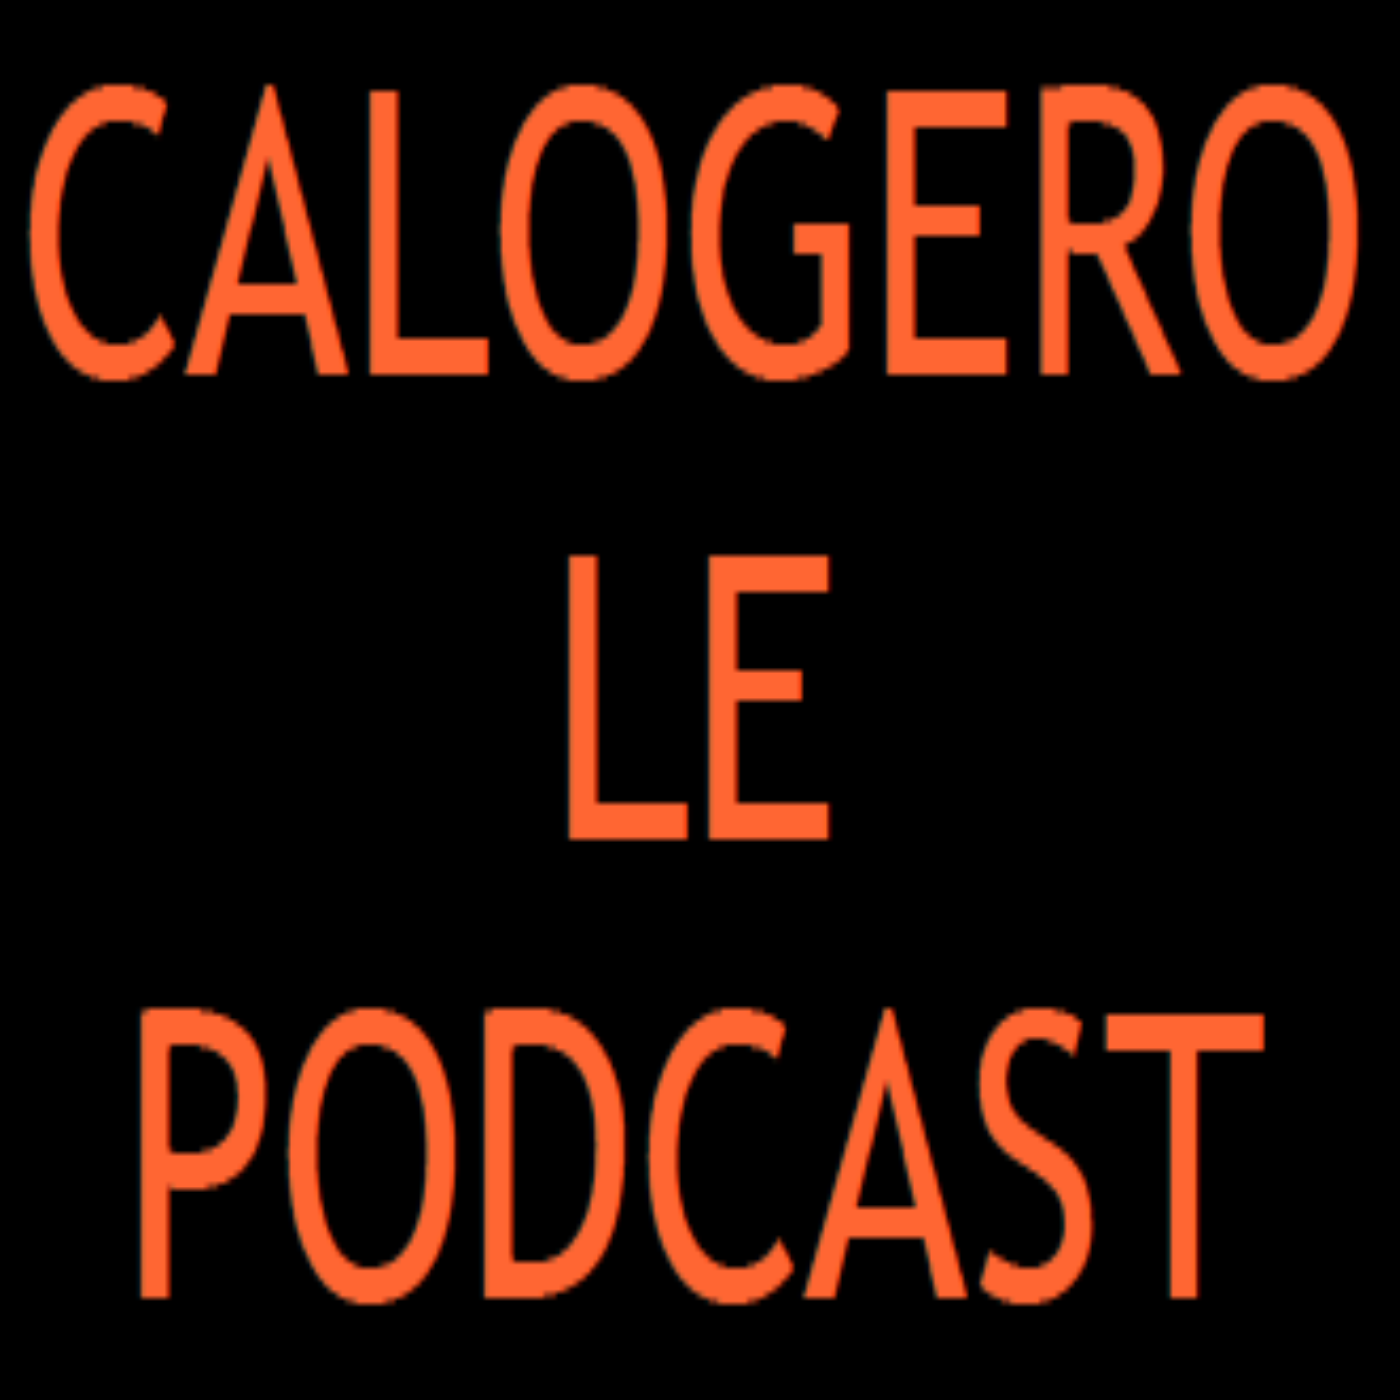 Podcast Episode 32 : Impressions Lille - SPOILERS